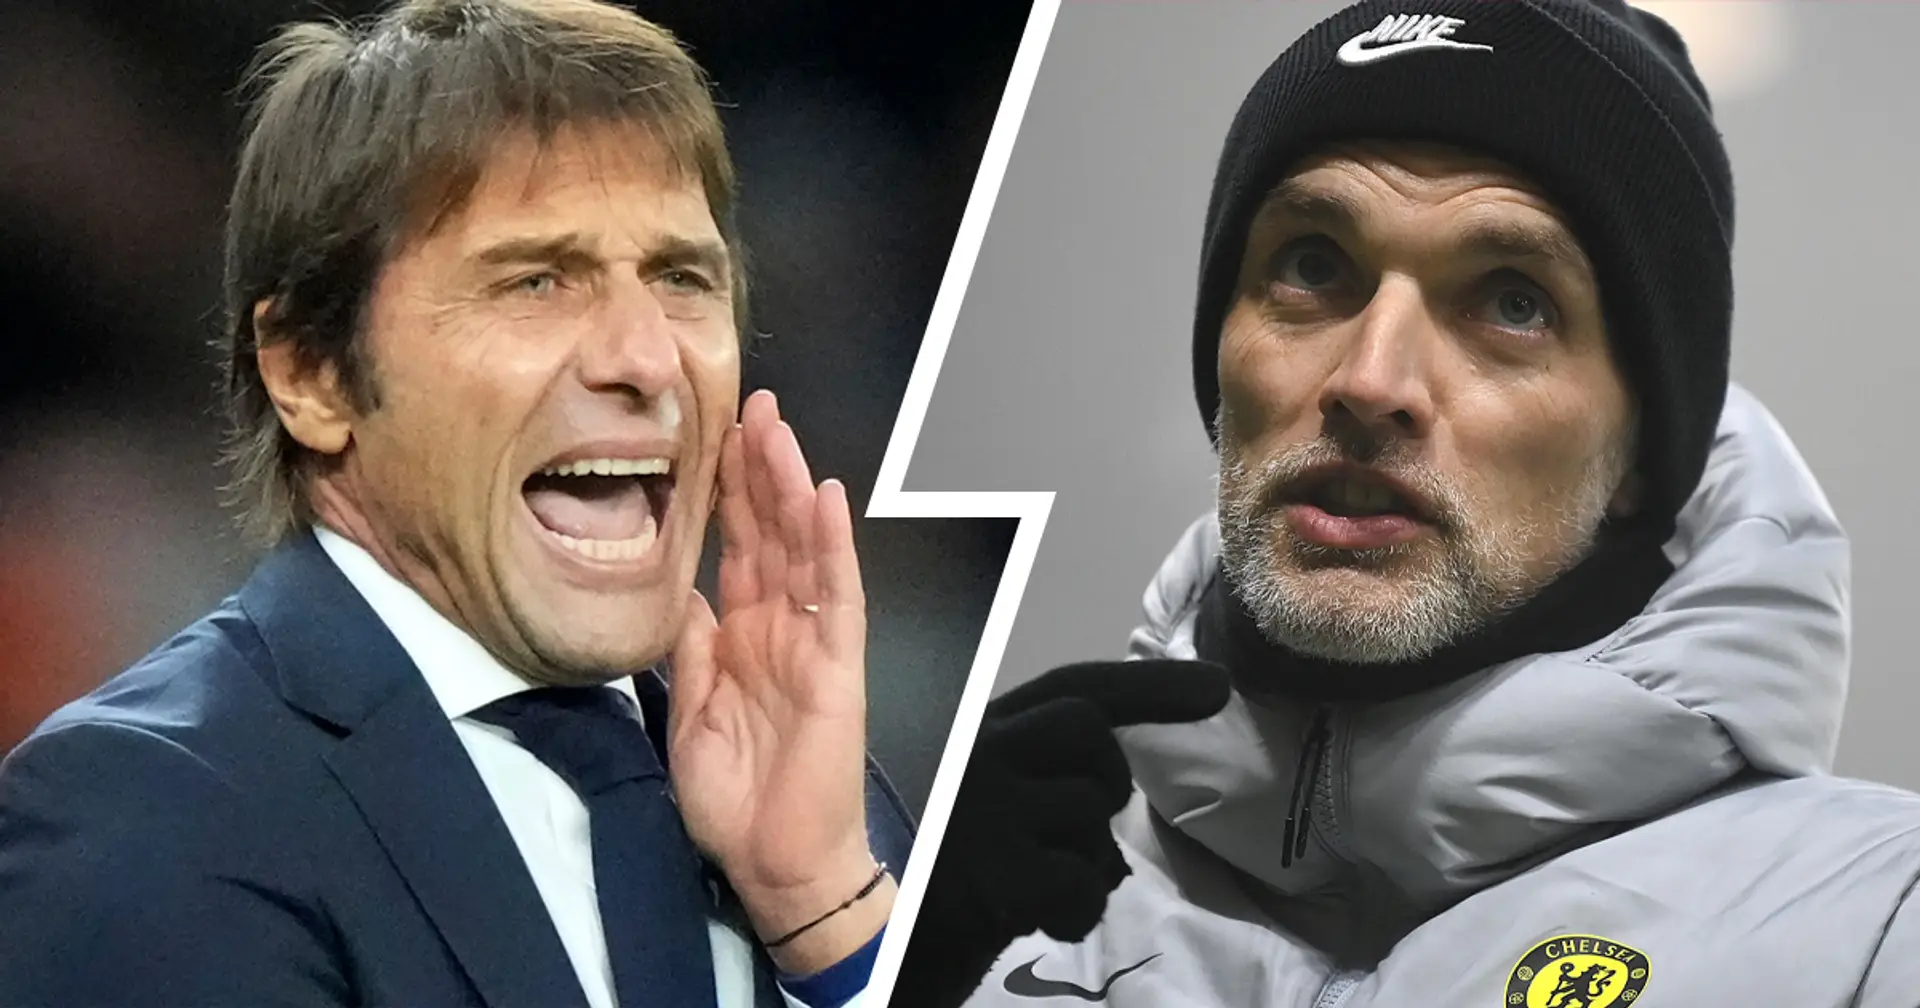 Chelsea to face Antonio Conte in Carabao Cup & 3 more big stories you might've missed